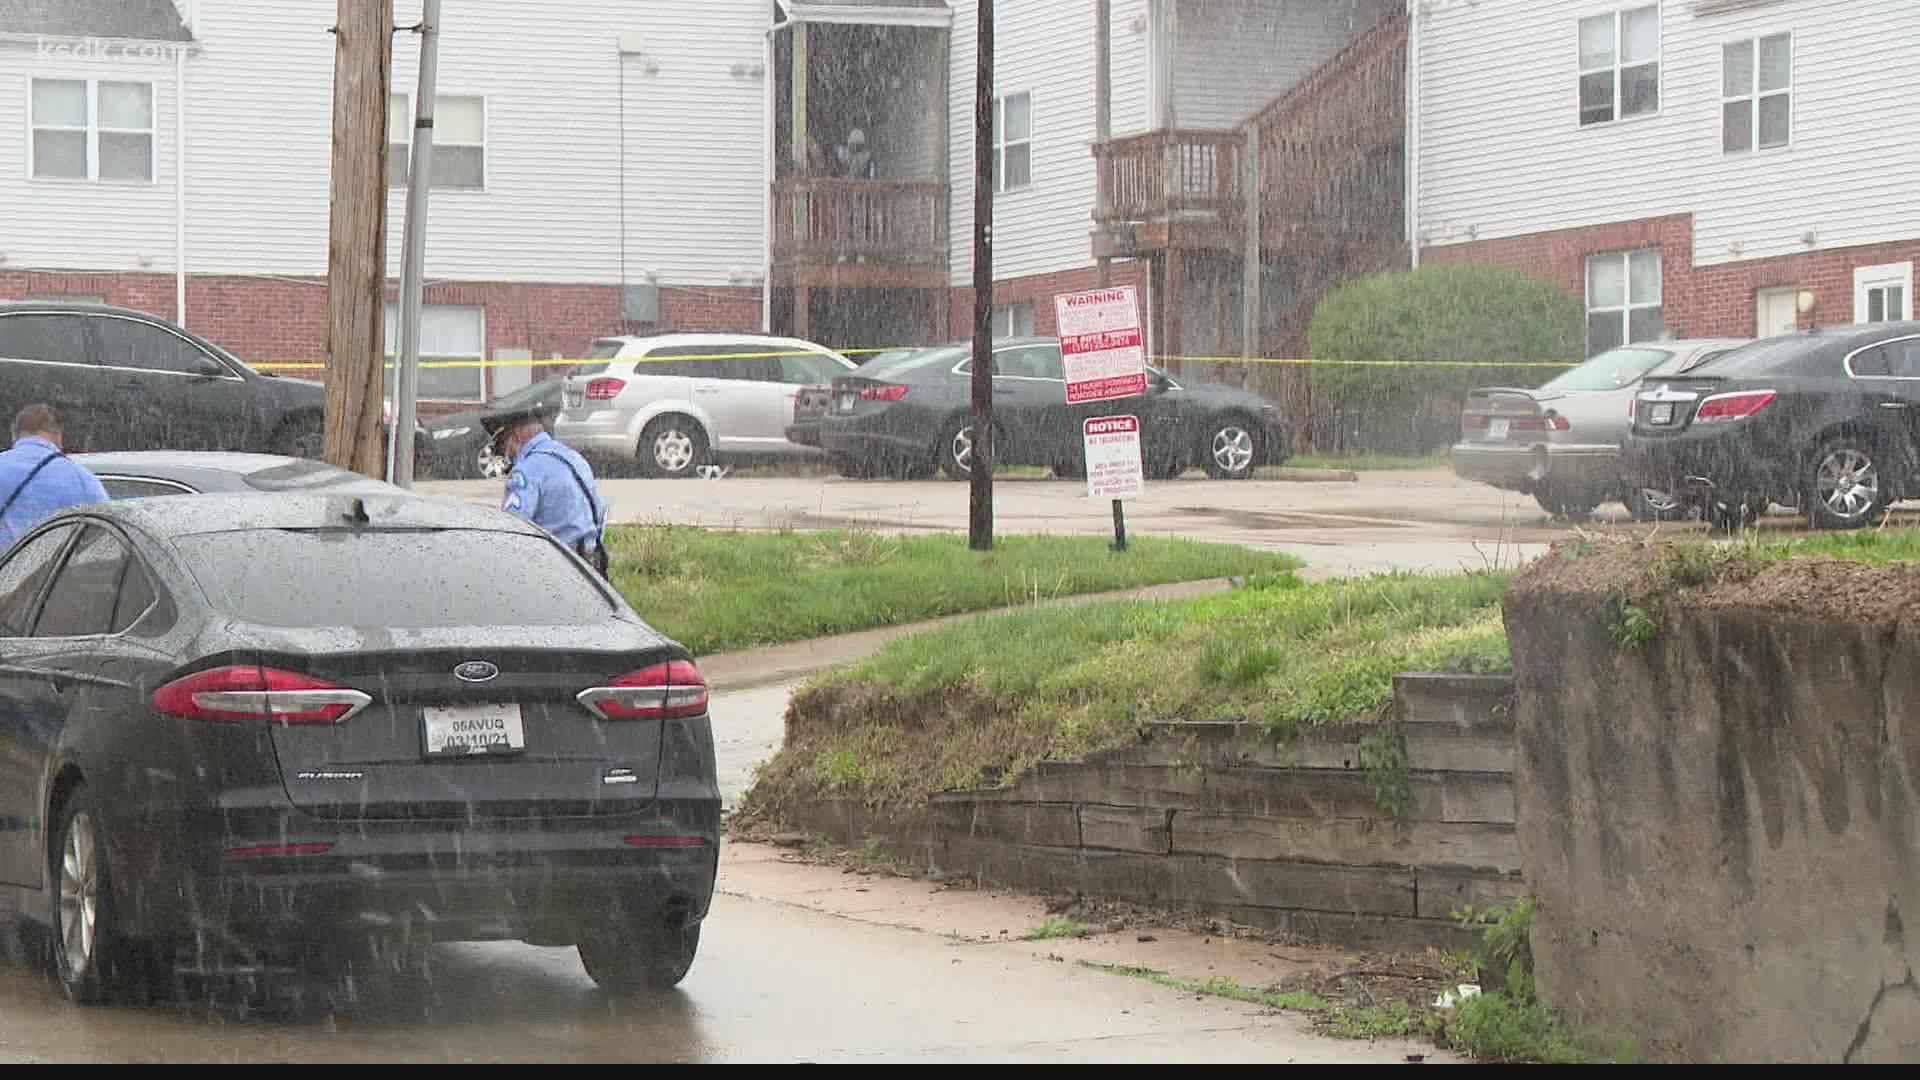 Victim, a 29-year-old man, was found in an alley with multiple gunshot wounds